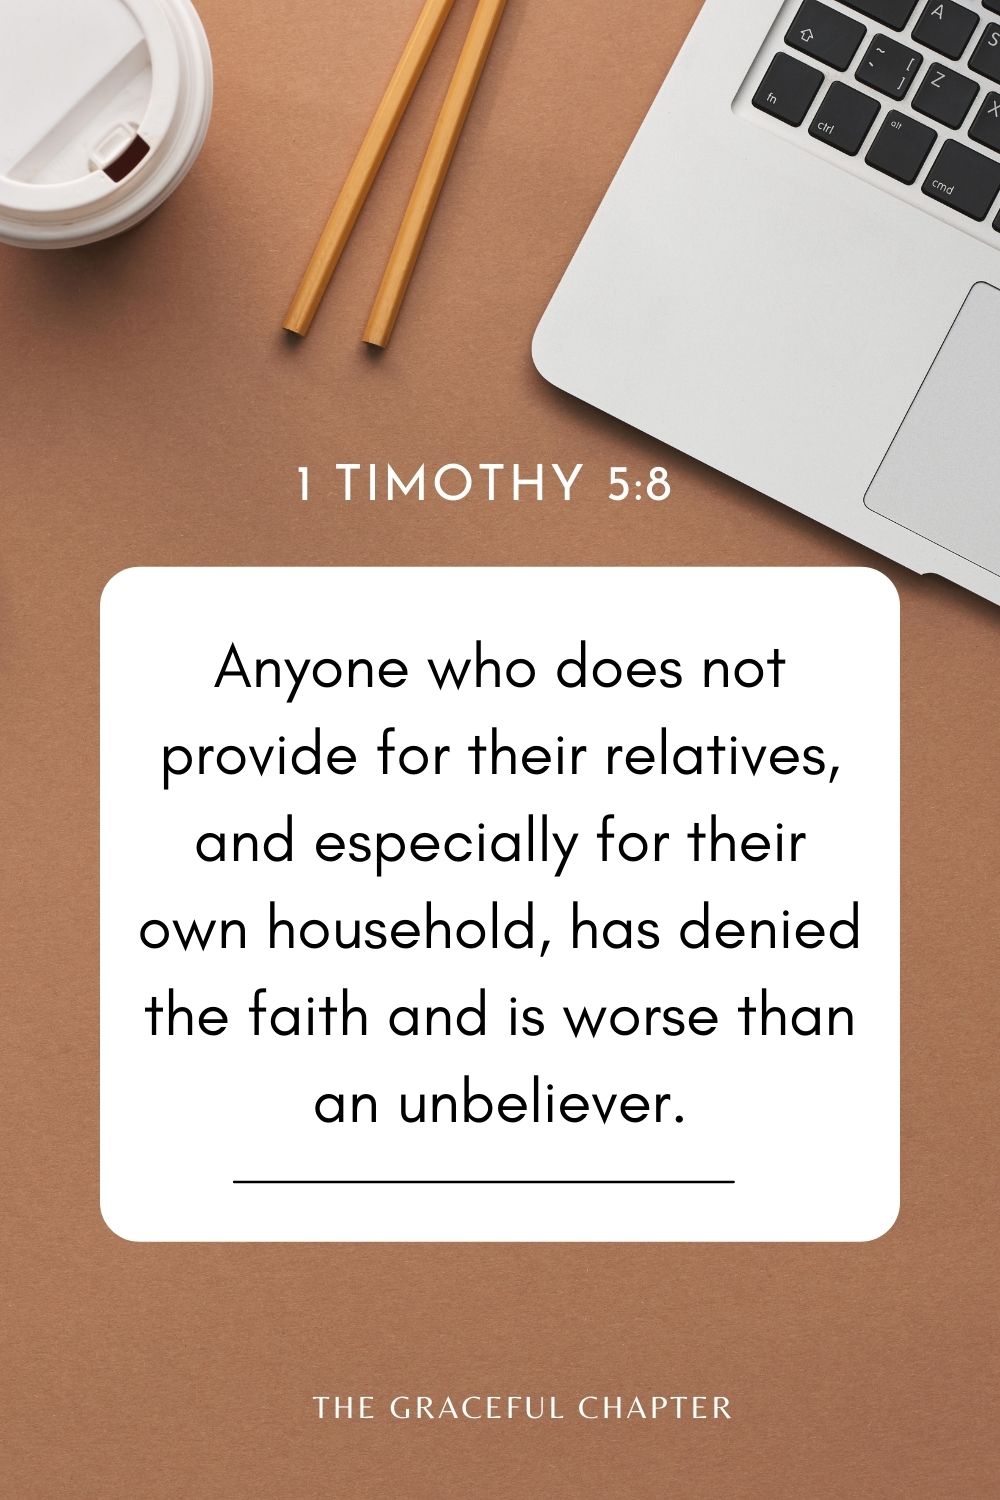 Anyone who does not provide for their relatives, and especially for their own household, has denied the faith and is worse than an unbeliever. 1 Timothy 5:8